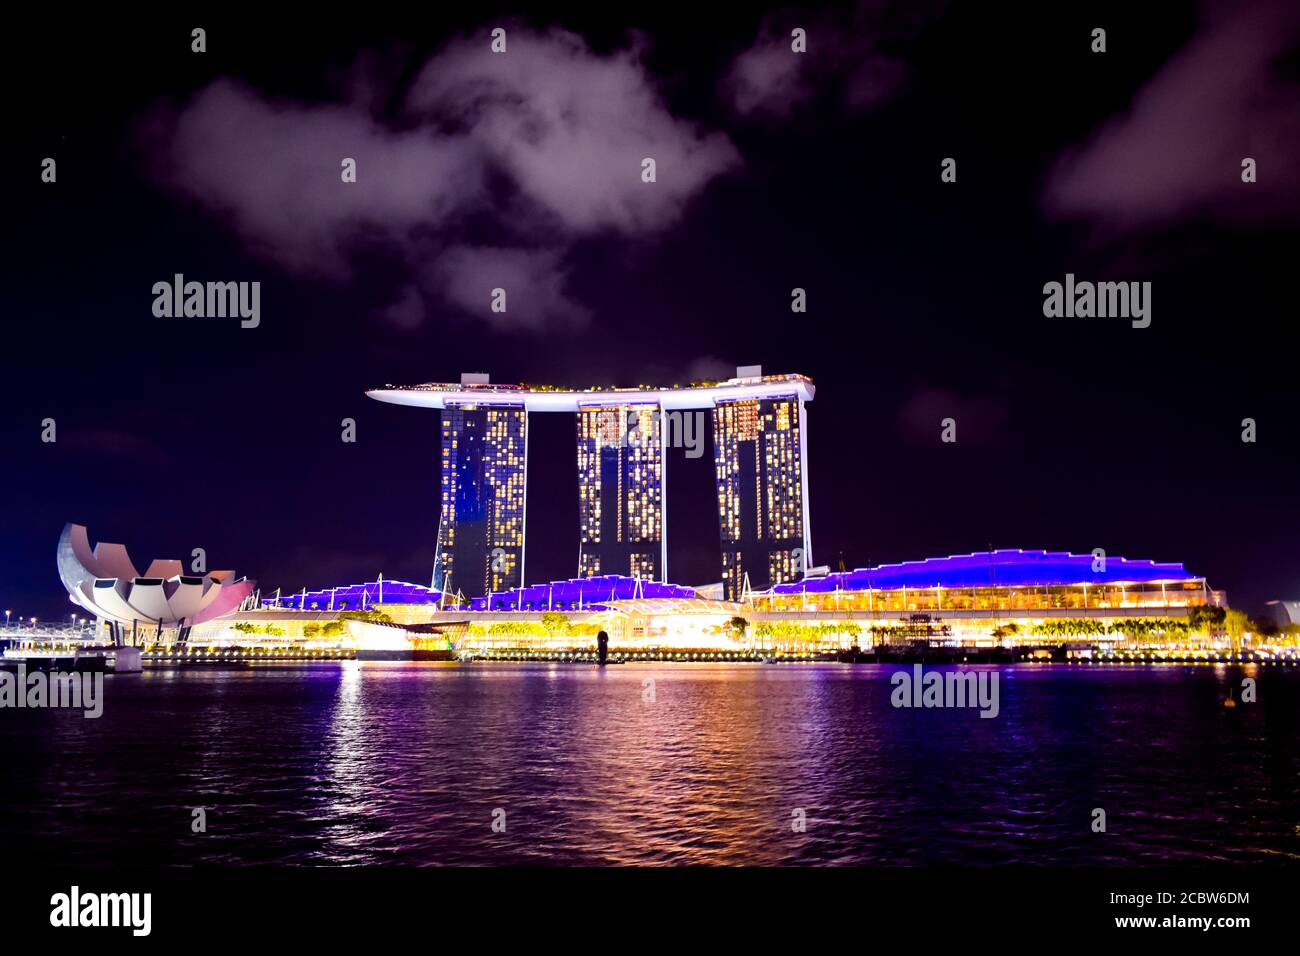 The Art Science Museum and Marina Bay Sands Stock Photo